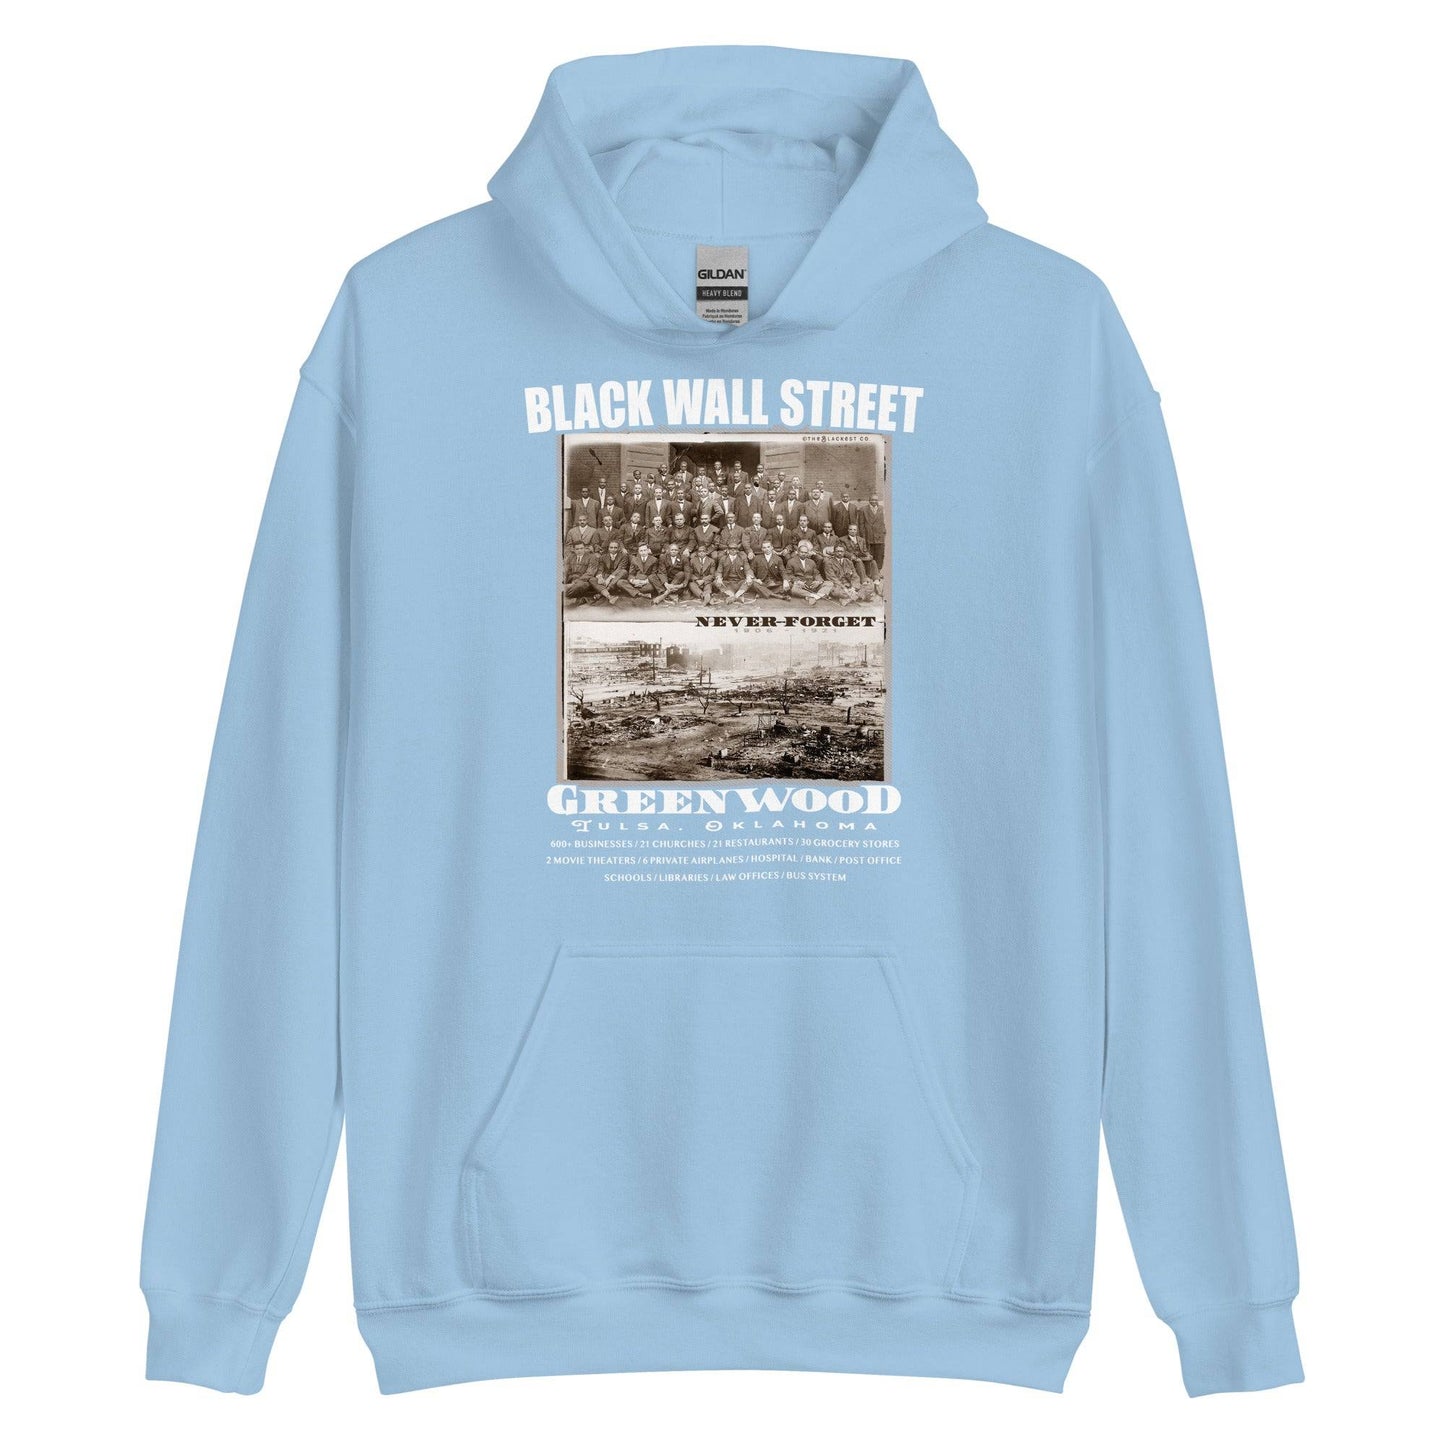 light blue pullover hoodie with writing that says Black Wall Street and Greenwood